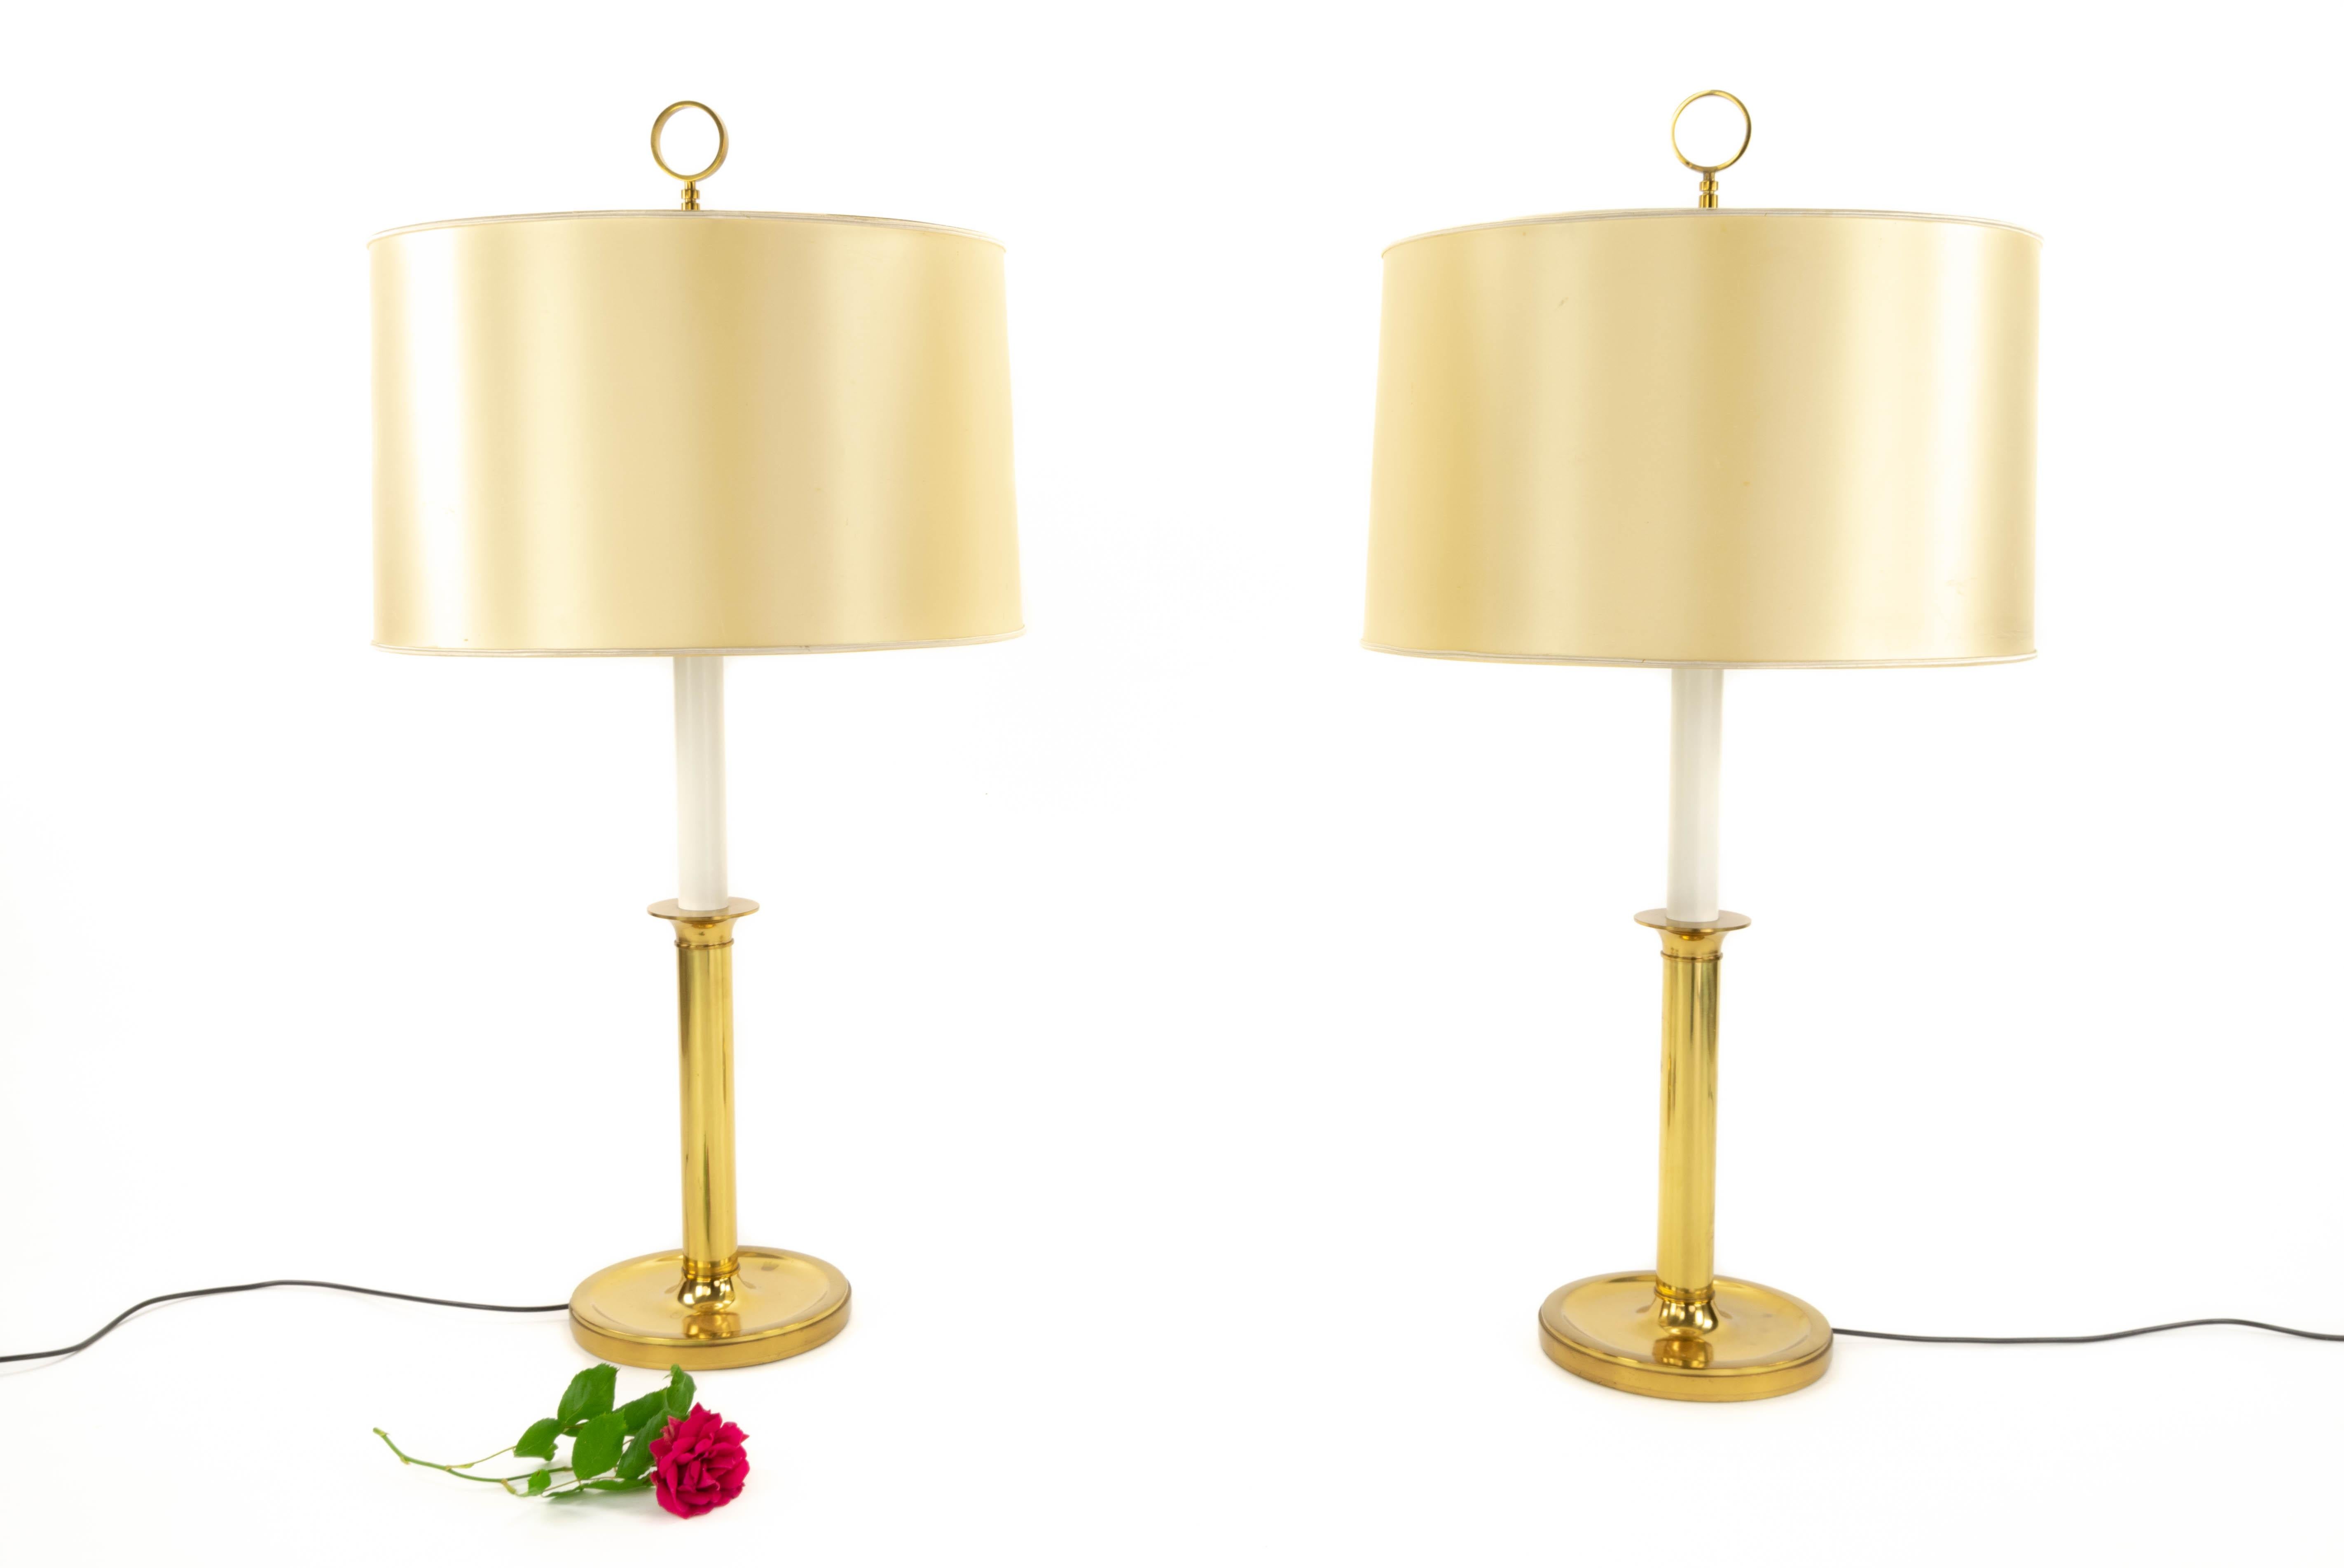 Pair of large lamps designed by Hansen for the Spanish company Metalarte. Brass foot, white lacquered metal structure and three E27 lamp holders. The rotary switch located in the structure in gray, allows to light separately one, two or three bulbs.